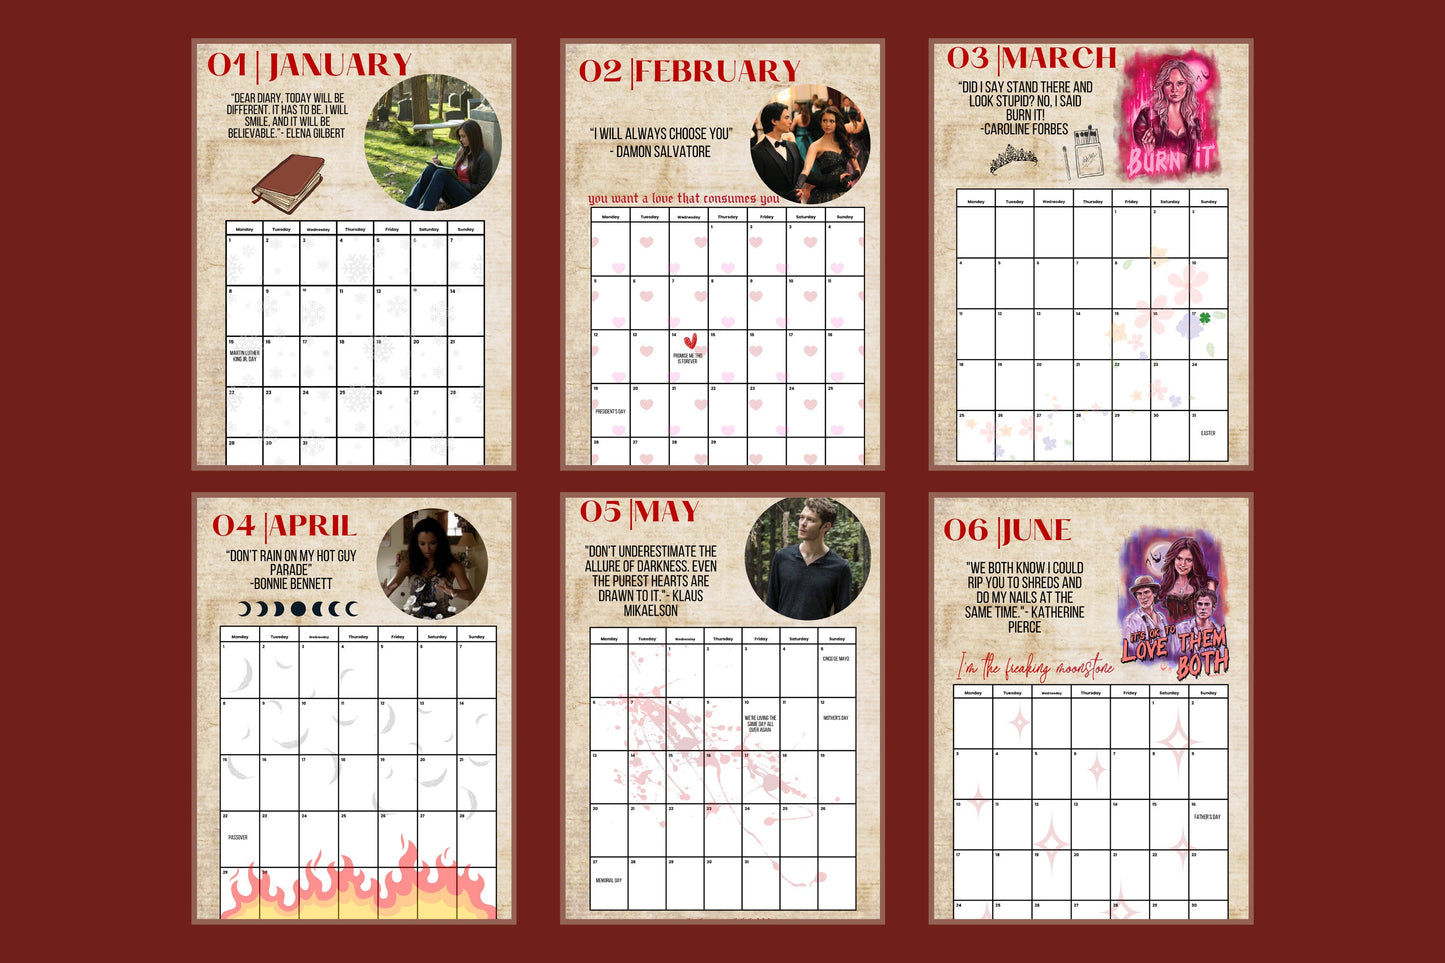 TVD 2024 Calender, The Vampire Diaries Calendar, TVD Fan gift, Salvatore Brothers, TVD Xmas gift, Tvd merch